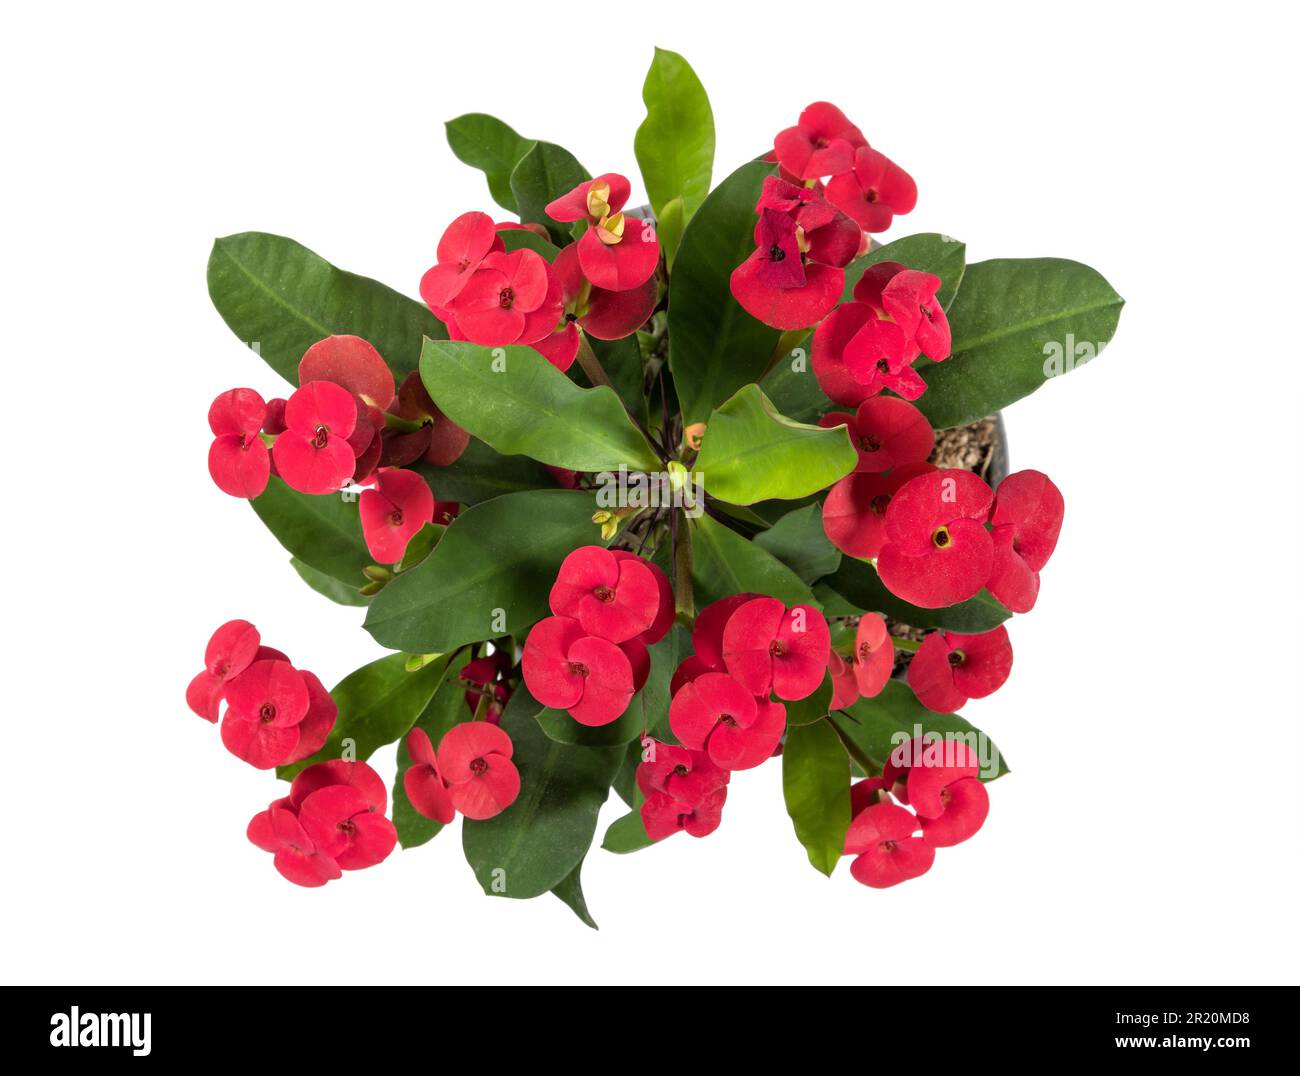 Top view of Euphorbia Milii with gentle red flowers and verdant leaves isolated on white background Stock Photo